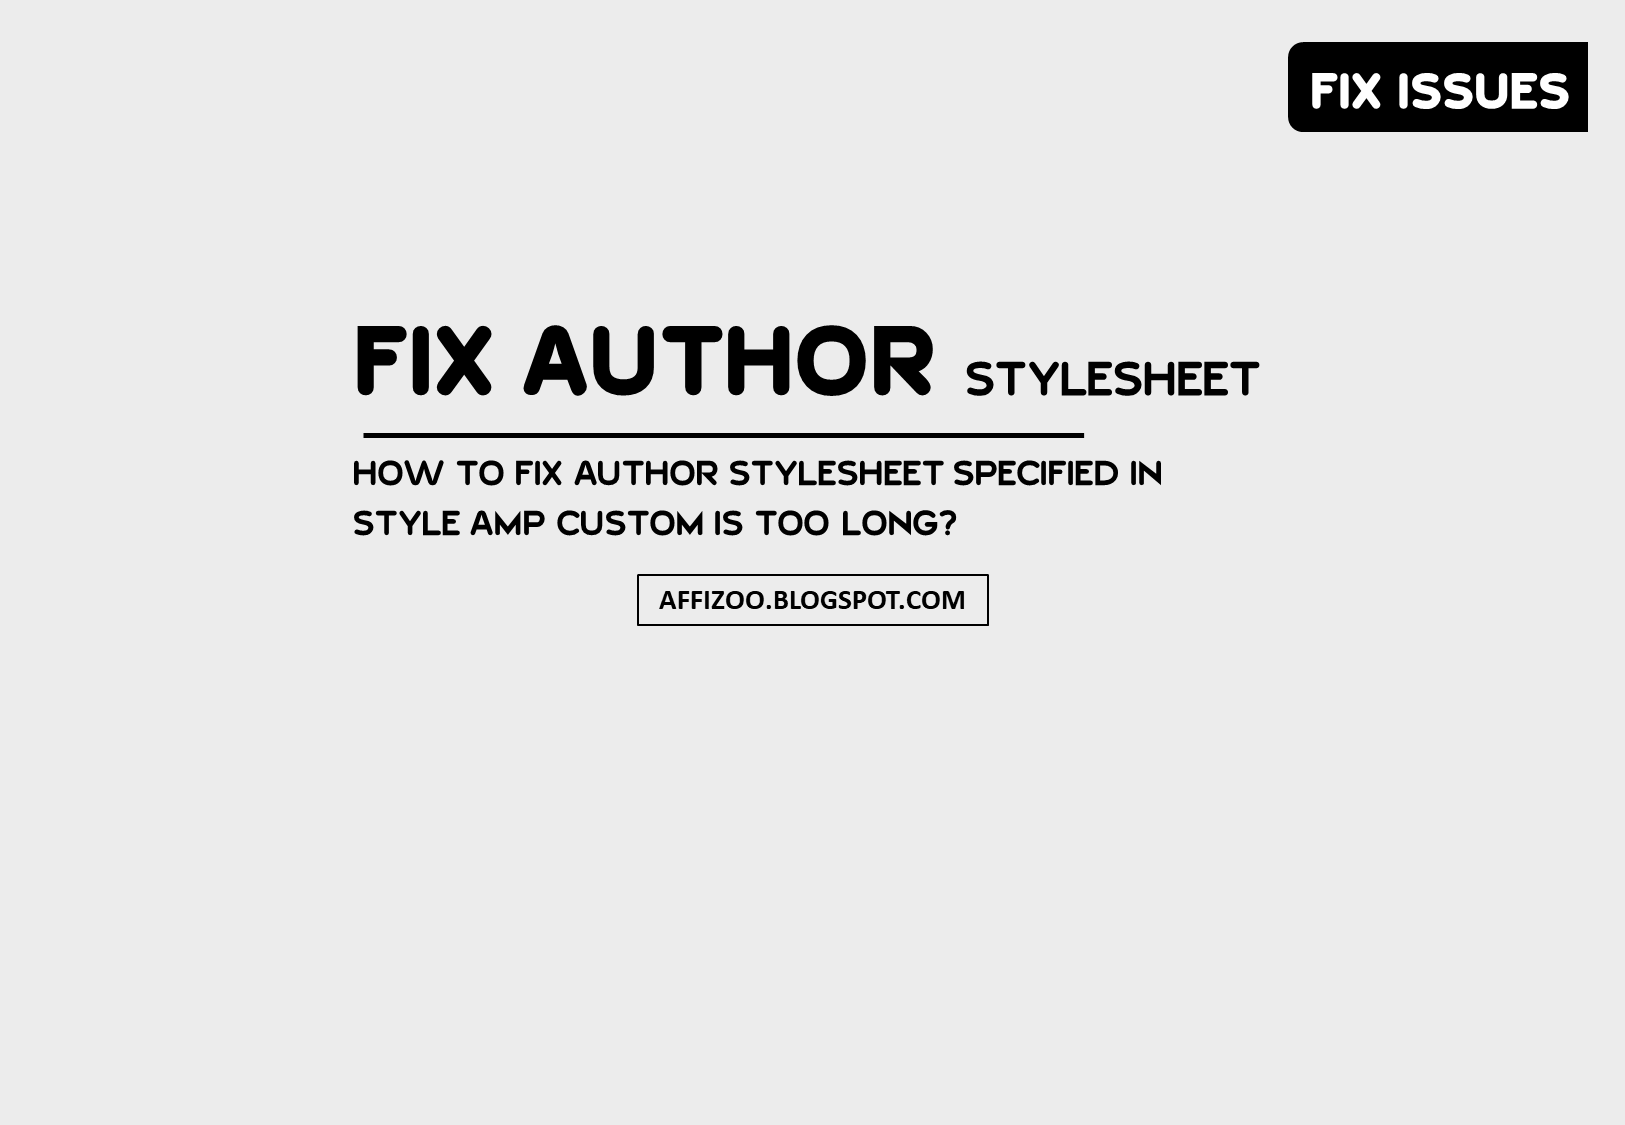 How To Fix The Author Stylesheet Specified In Style AMP Custom Is Too Long? In AMP Pages